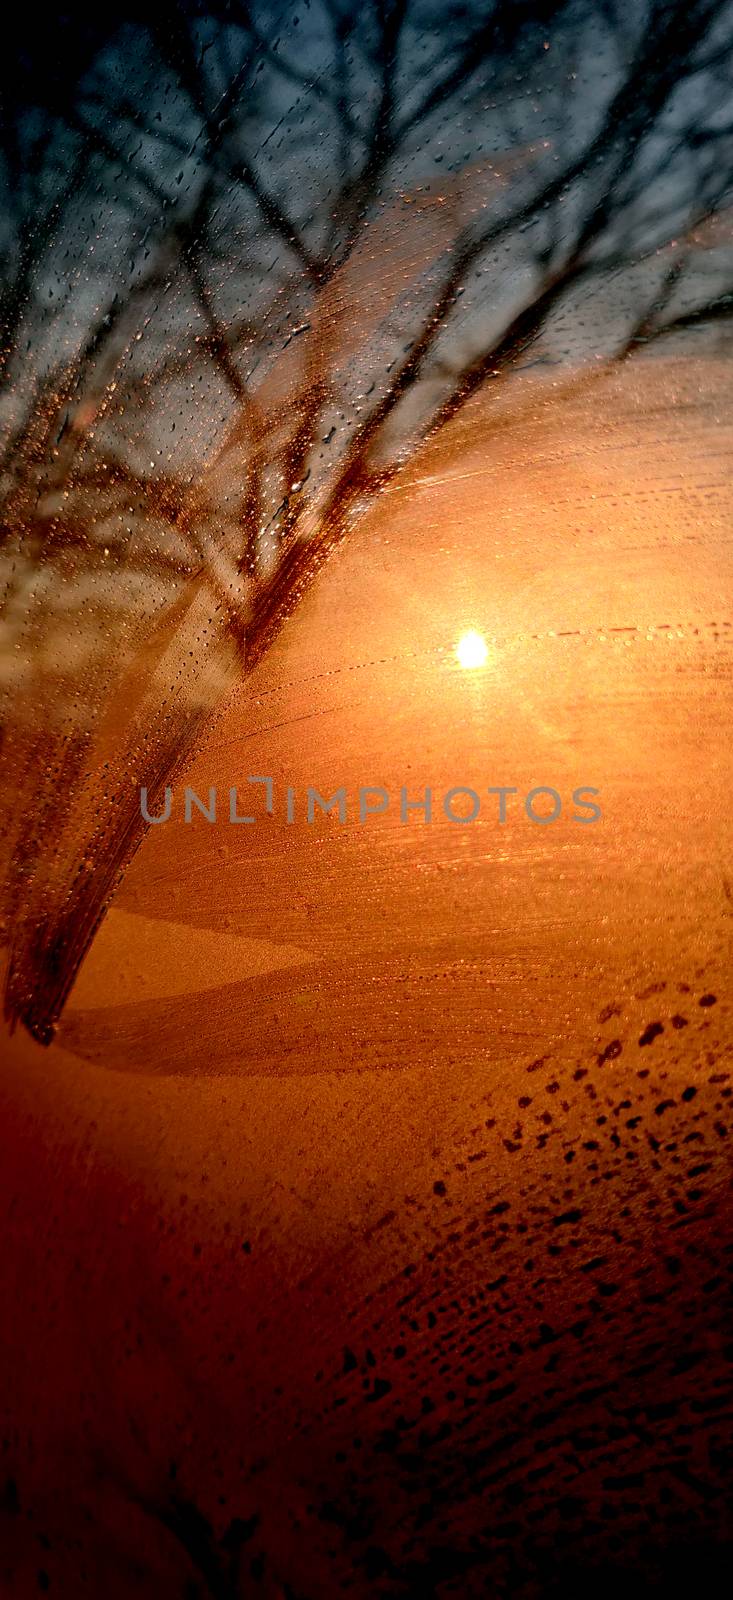 Abstract image of sunrise seen through foggy glass and textured tree.